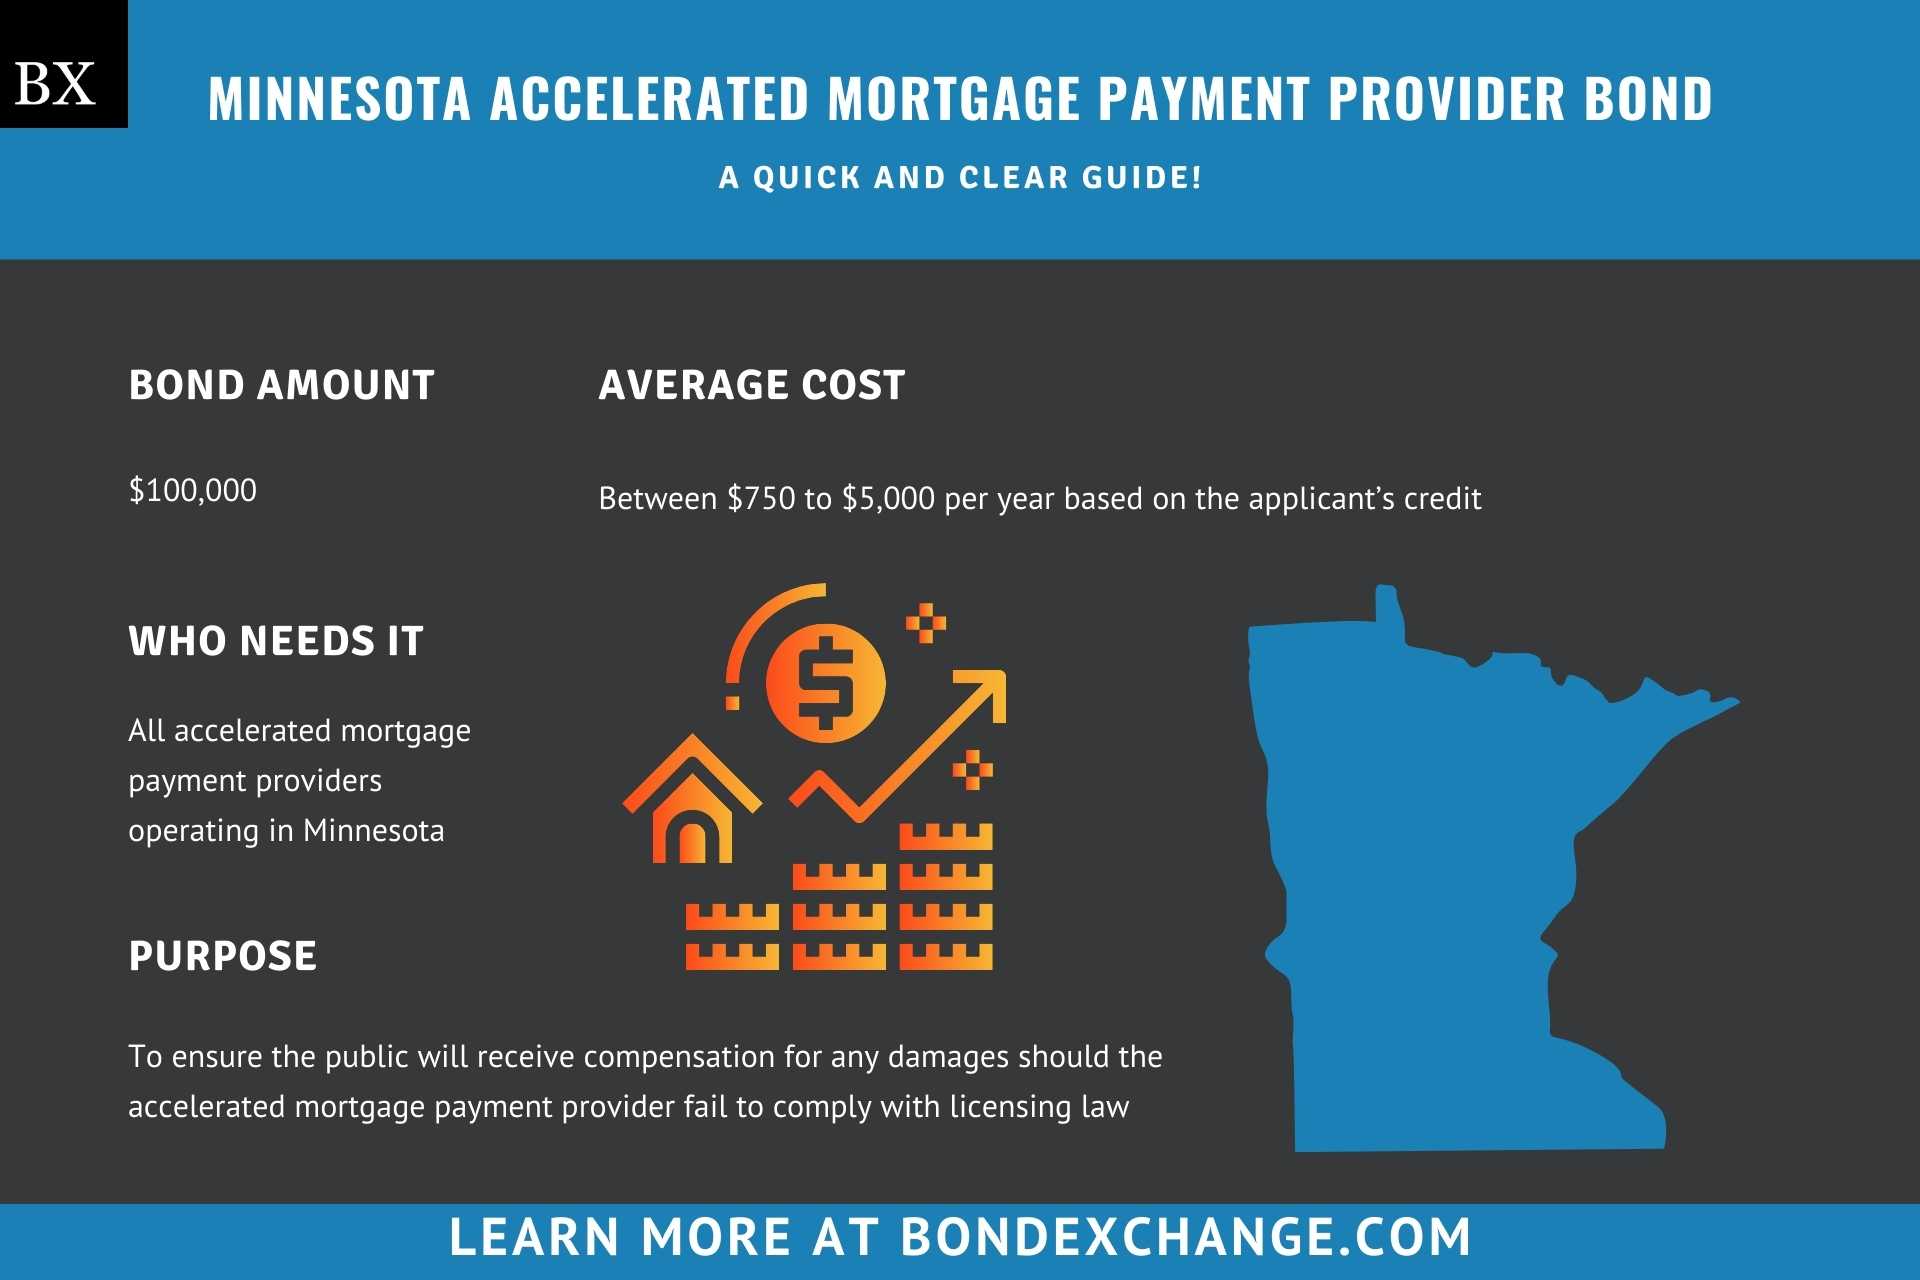 Minnesota Accelerated Mortgage Payment Provider Bond